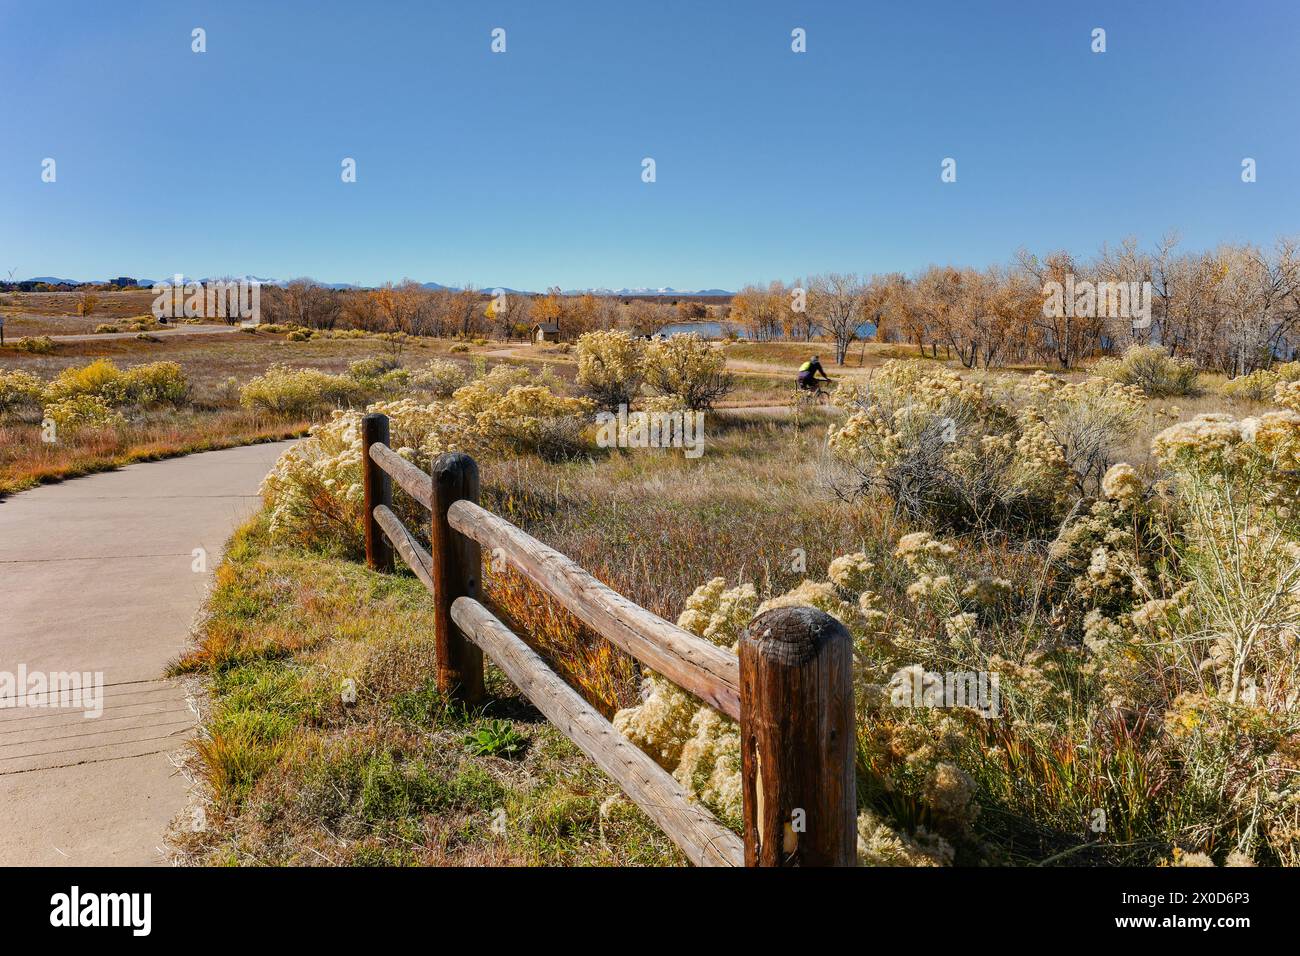 The natural habitat around Cherry Creek State Park in Colorado in the Fall with Rabbitbrush bushes and other vegetation in the landscape by a trail. Stock Photo